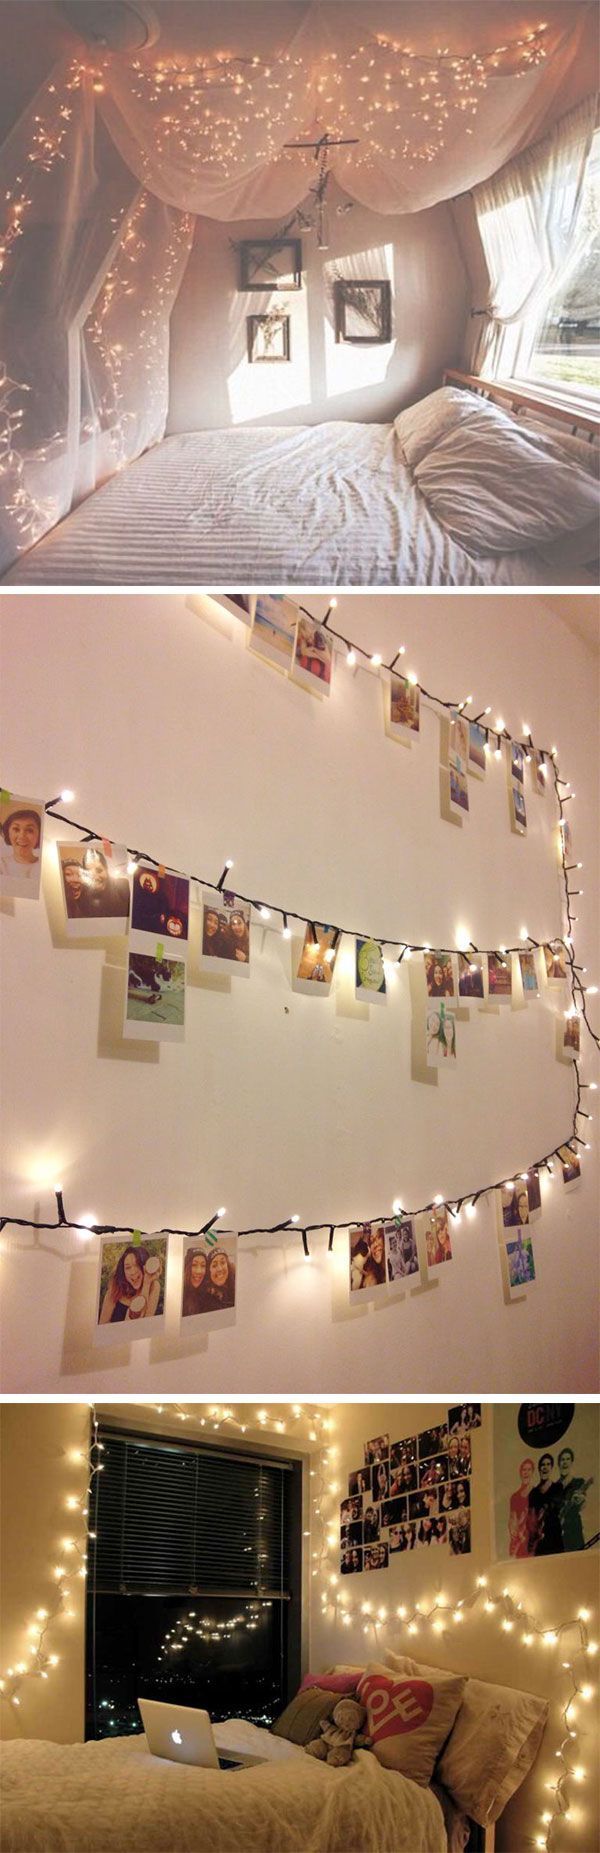 13 ways to use fairy lights and make your bedroom look magical